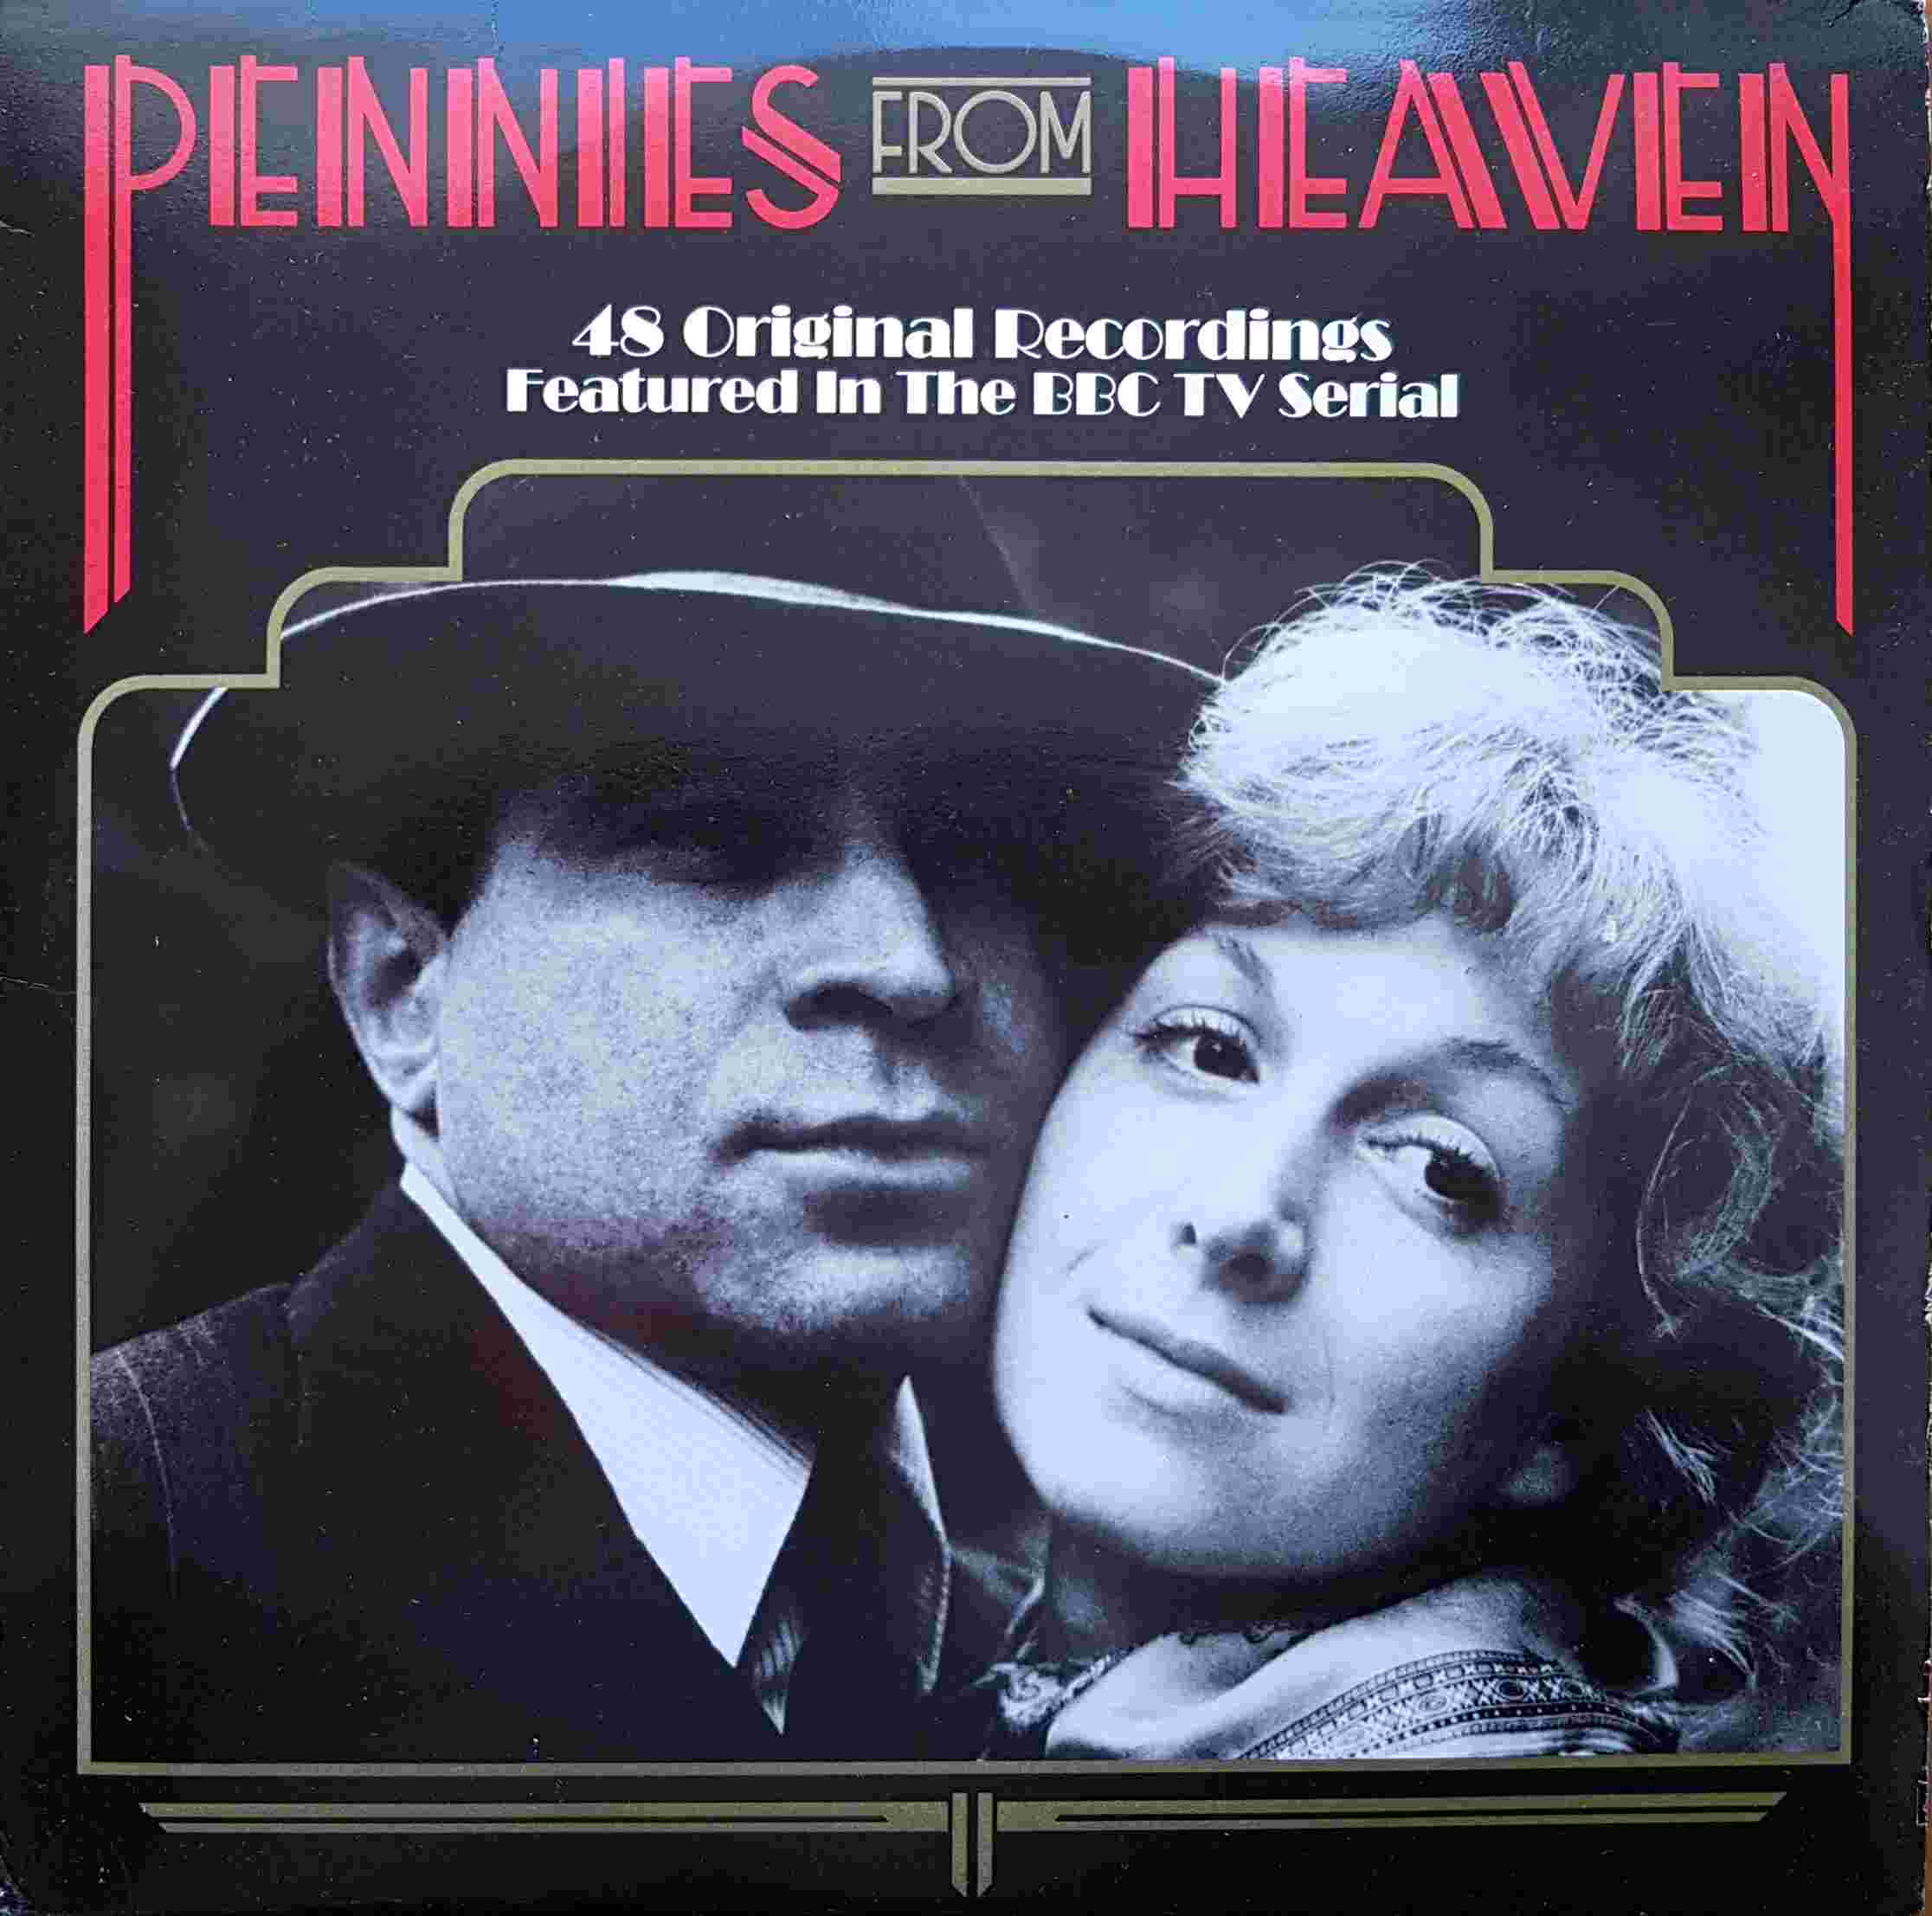 Picture of REF 768 Pennies from Heaven by artist Various from the BBC records and Tapes library